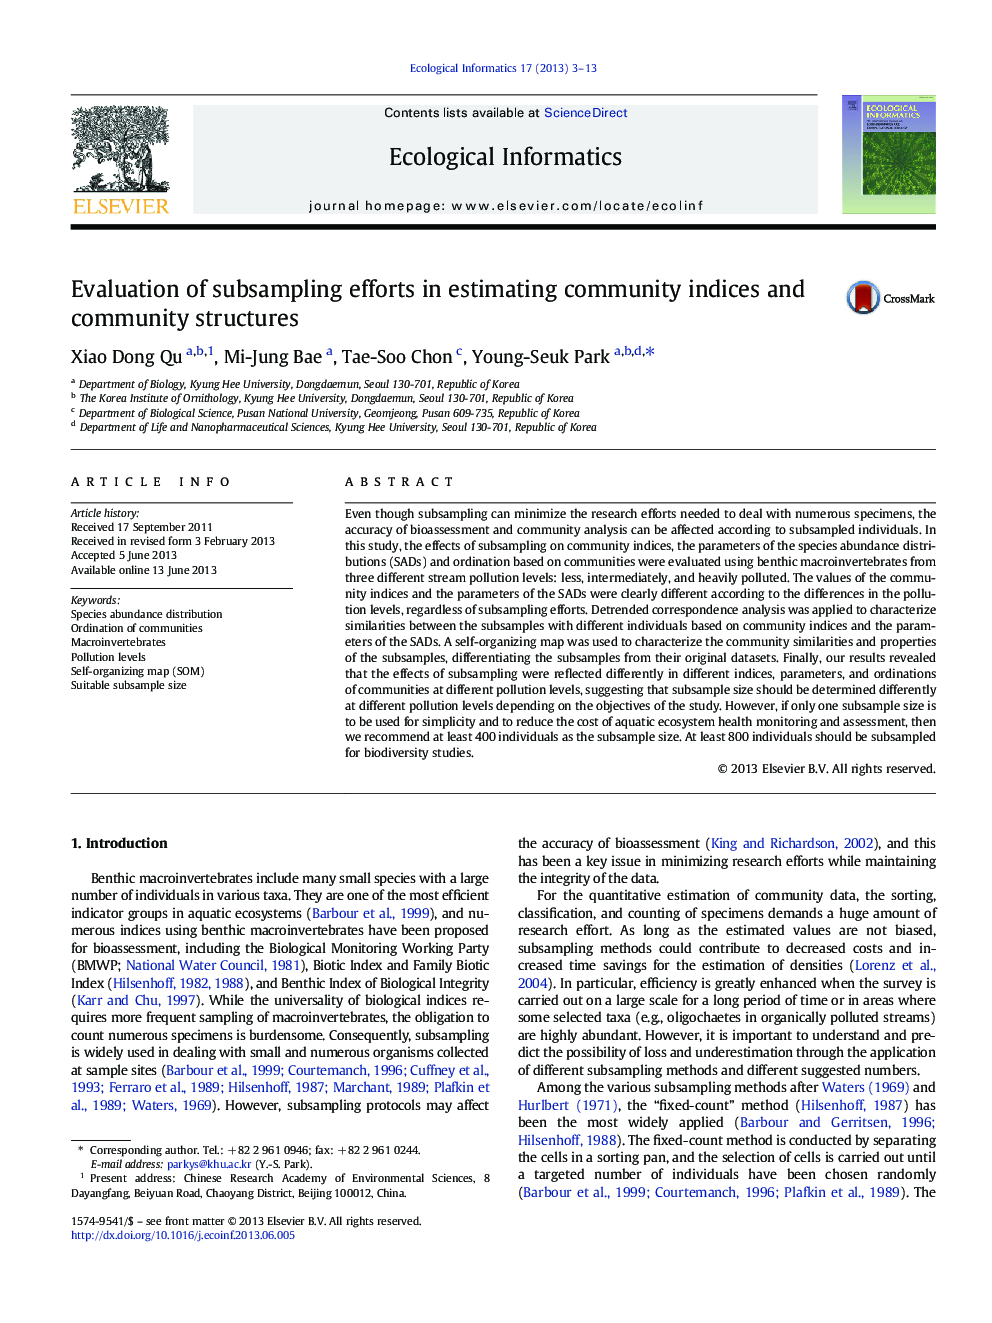 Evaluation of subsampling efforts in estimating community indices and community structures